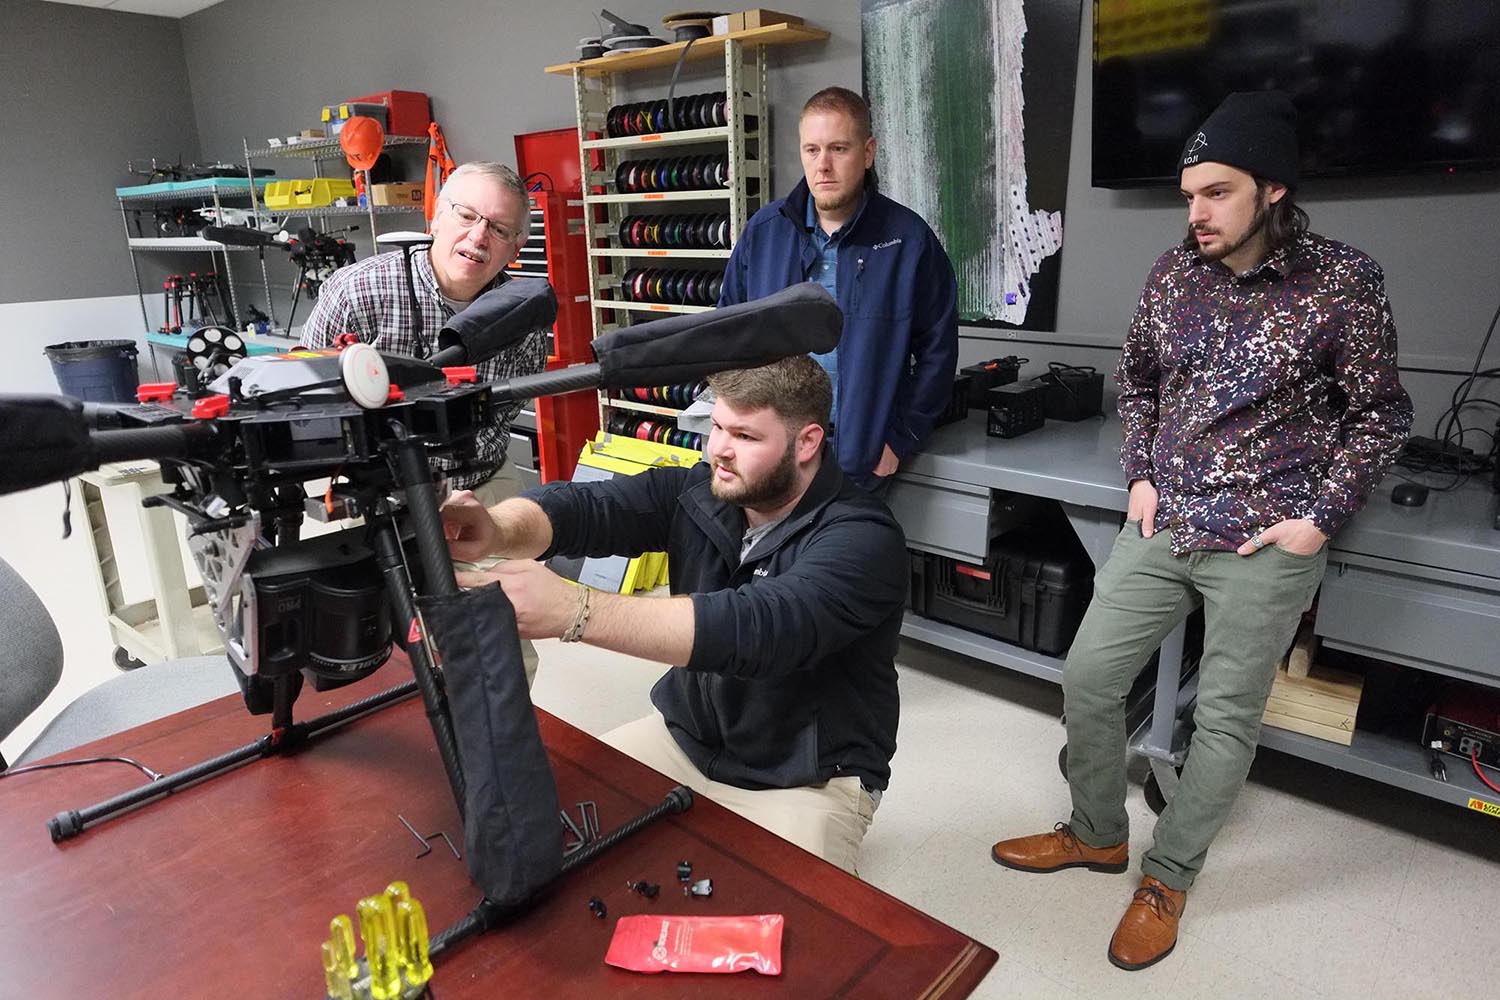 A group works on a drone